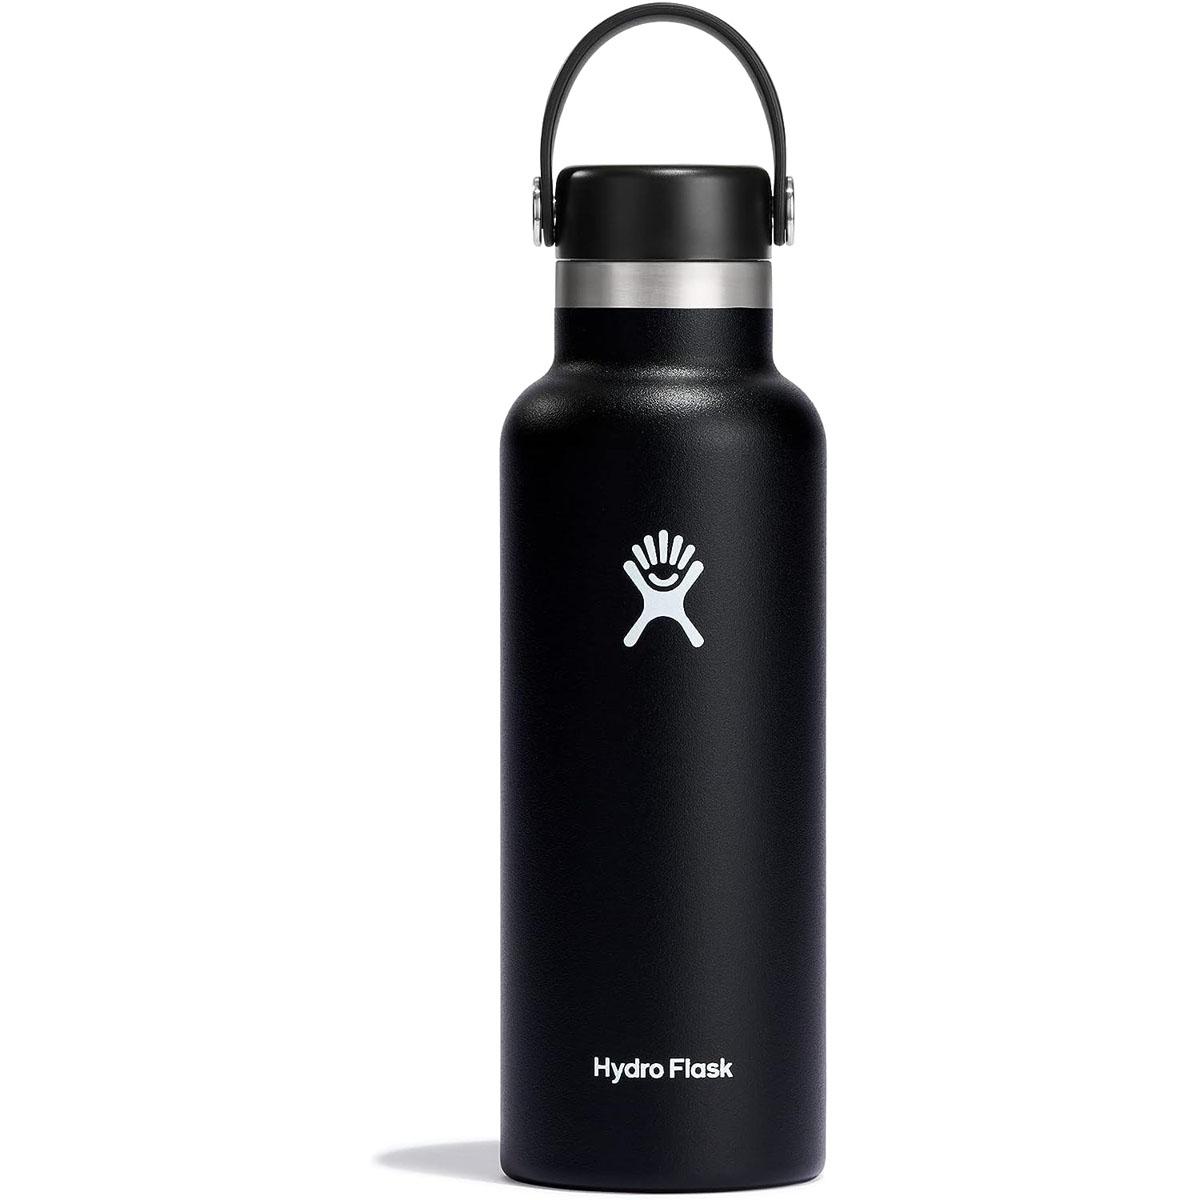 18oz Hydro Flask Standard Mouth Bottle with Flex Cap for $17.53